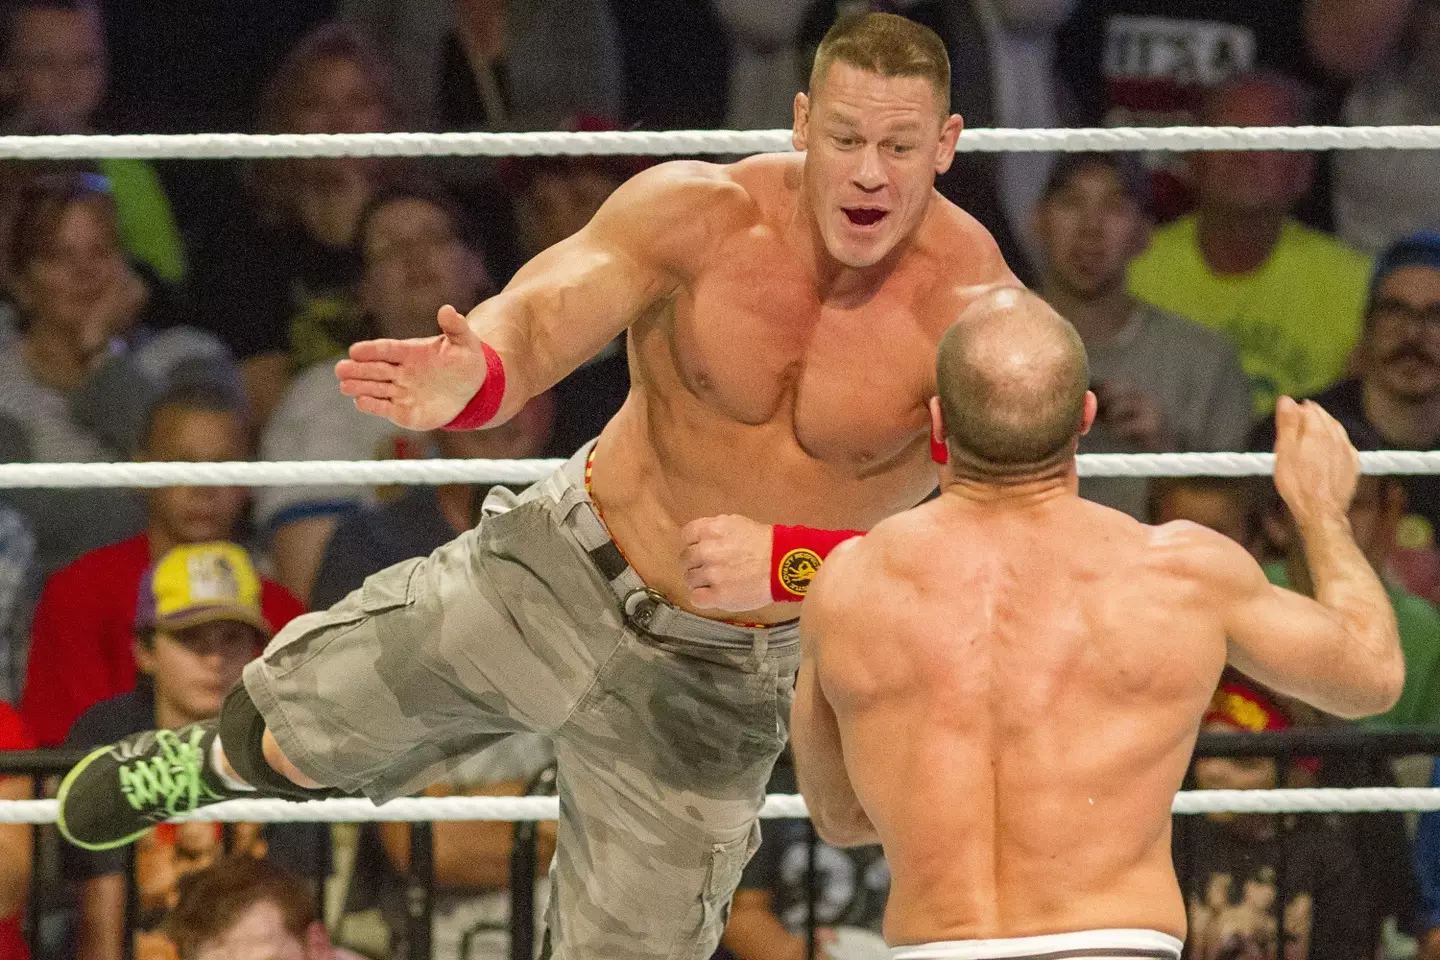 Cena in the ring against former WWE superstar Cesaro. (Image